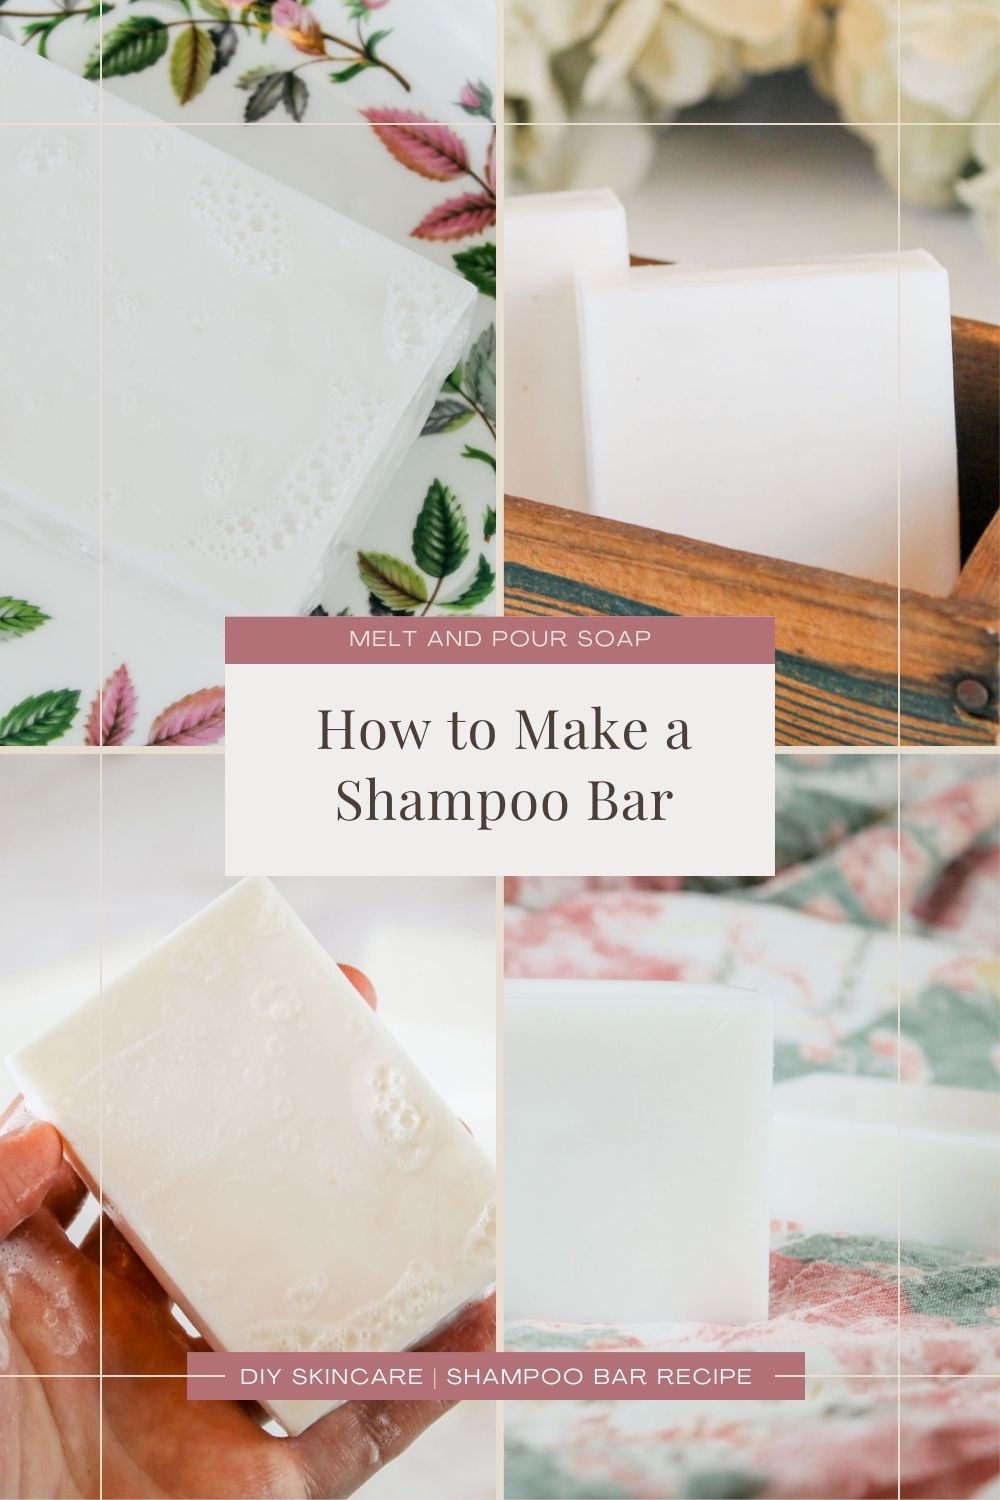 collage of images showing homemade shampoo bars, hand holding solid shampoo bar, box full of soap bars and a plate covered in a foamy bar of soap